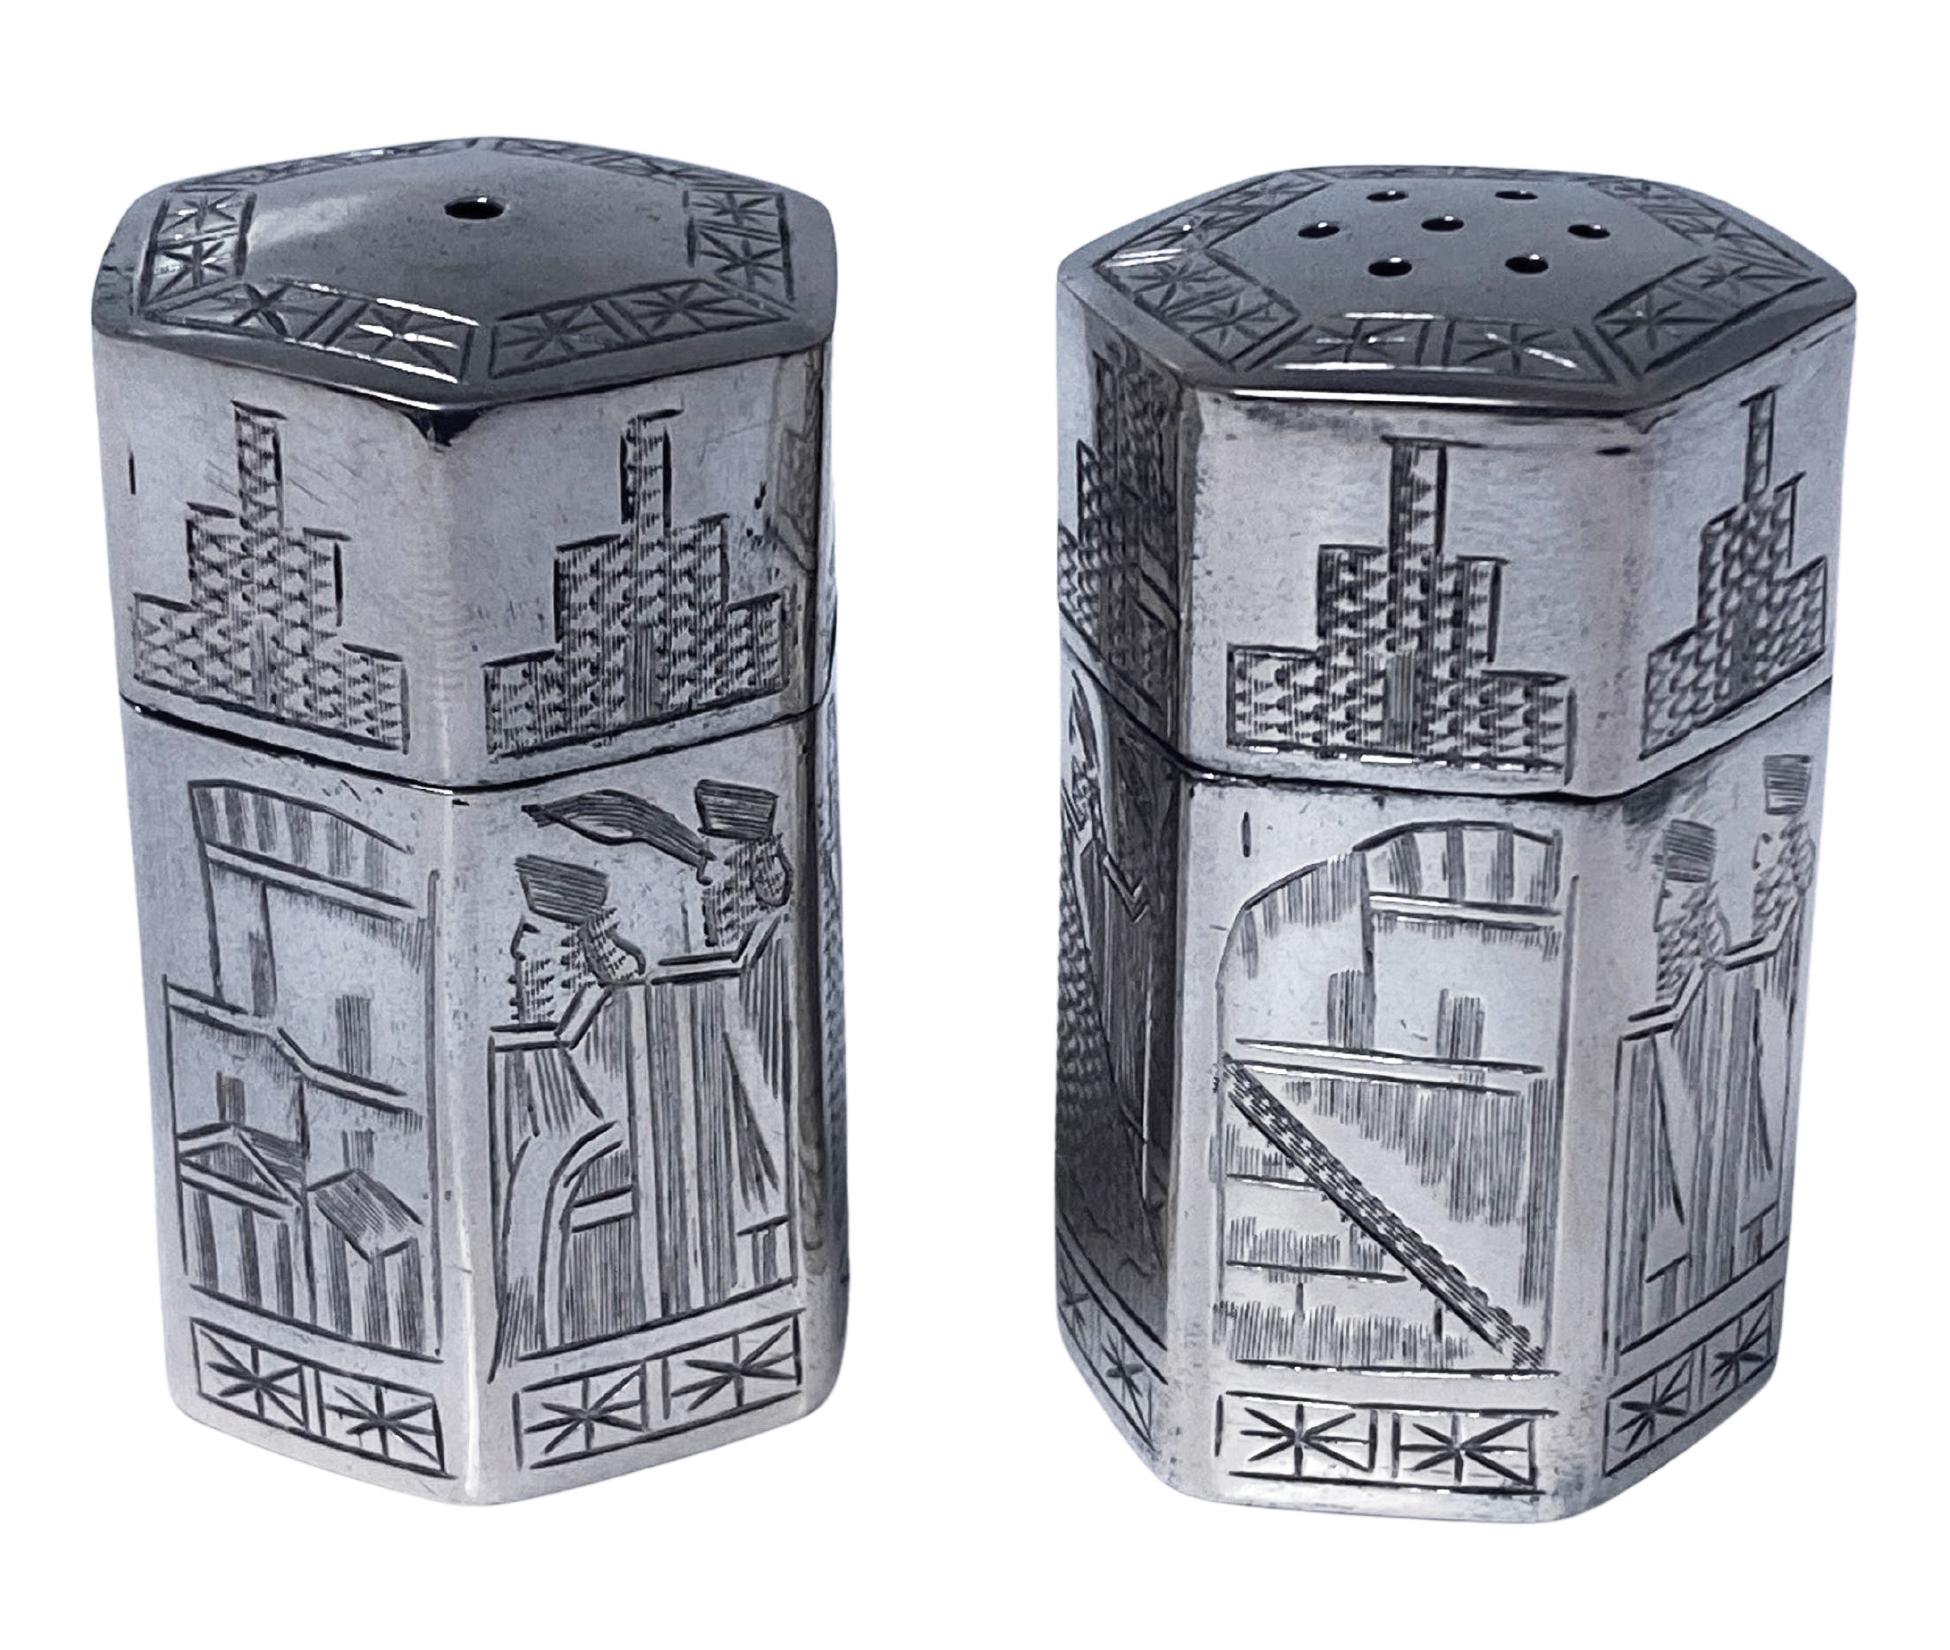 Pair of Antique Silver Casters Persia C.1920. Silver hexagonal salt and pepper shakers fully decorated with Assyrian motifs. 84 hallmarks on bases. Height: 1.75 inches. Weight: 57.16 grams. 